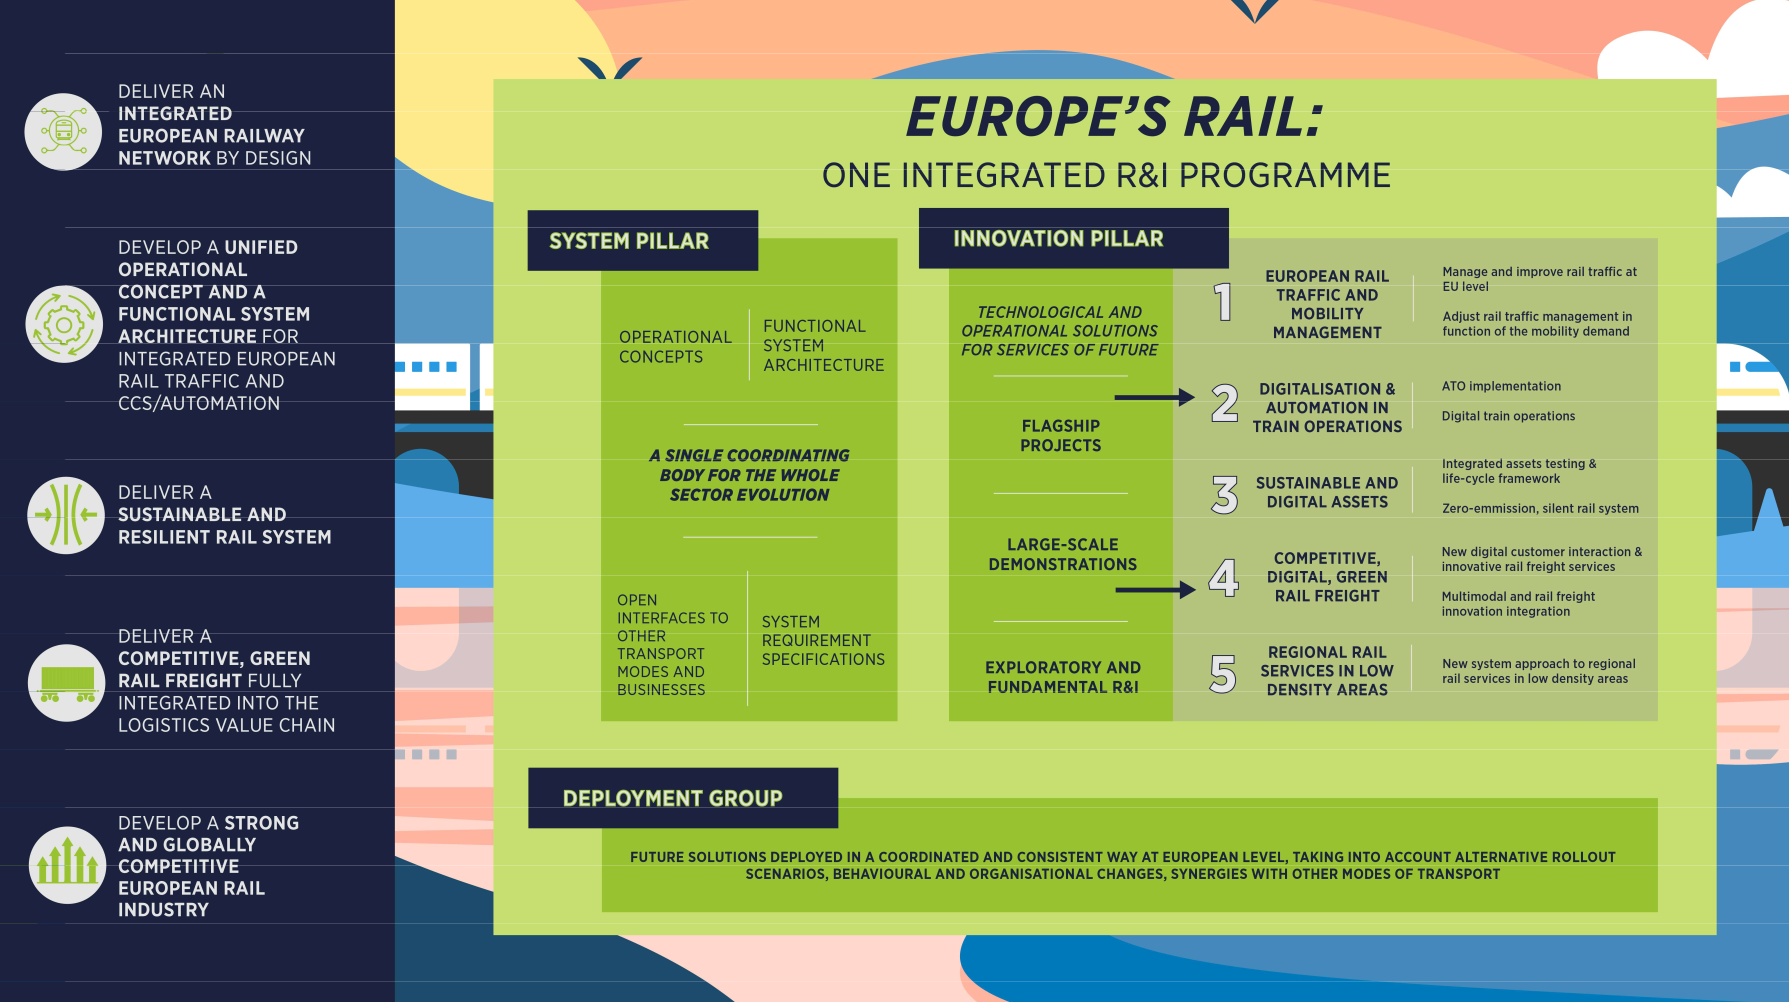 Enlarged view: Europe's integrated R&I programme